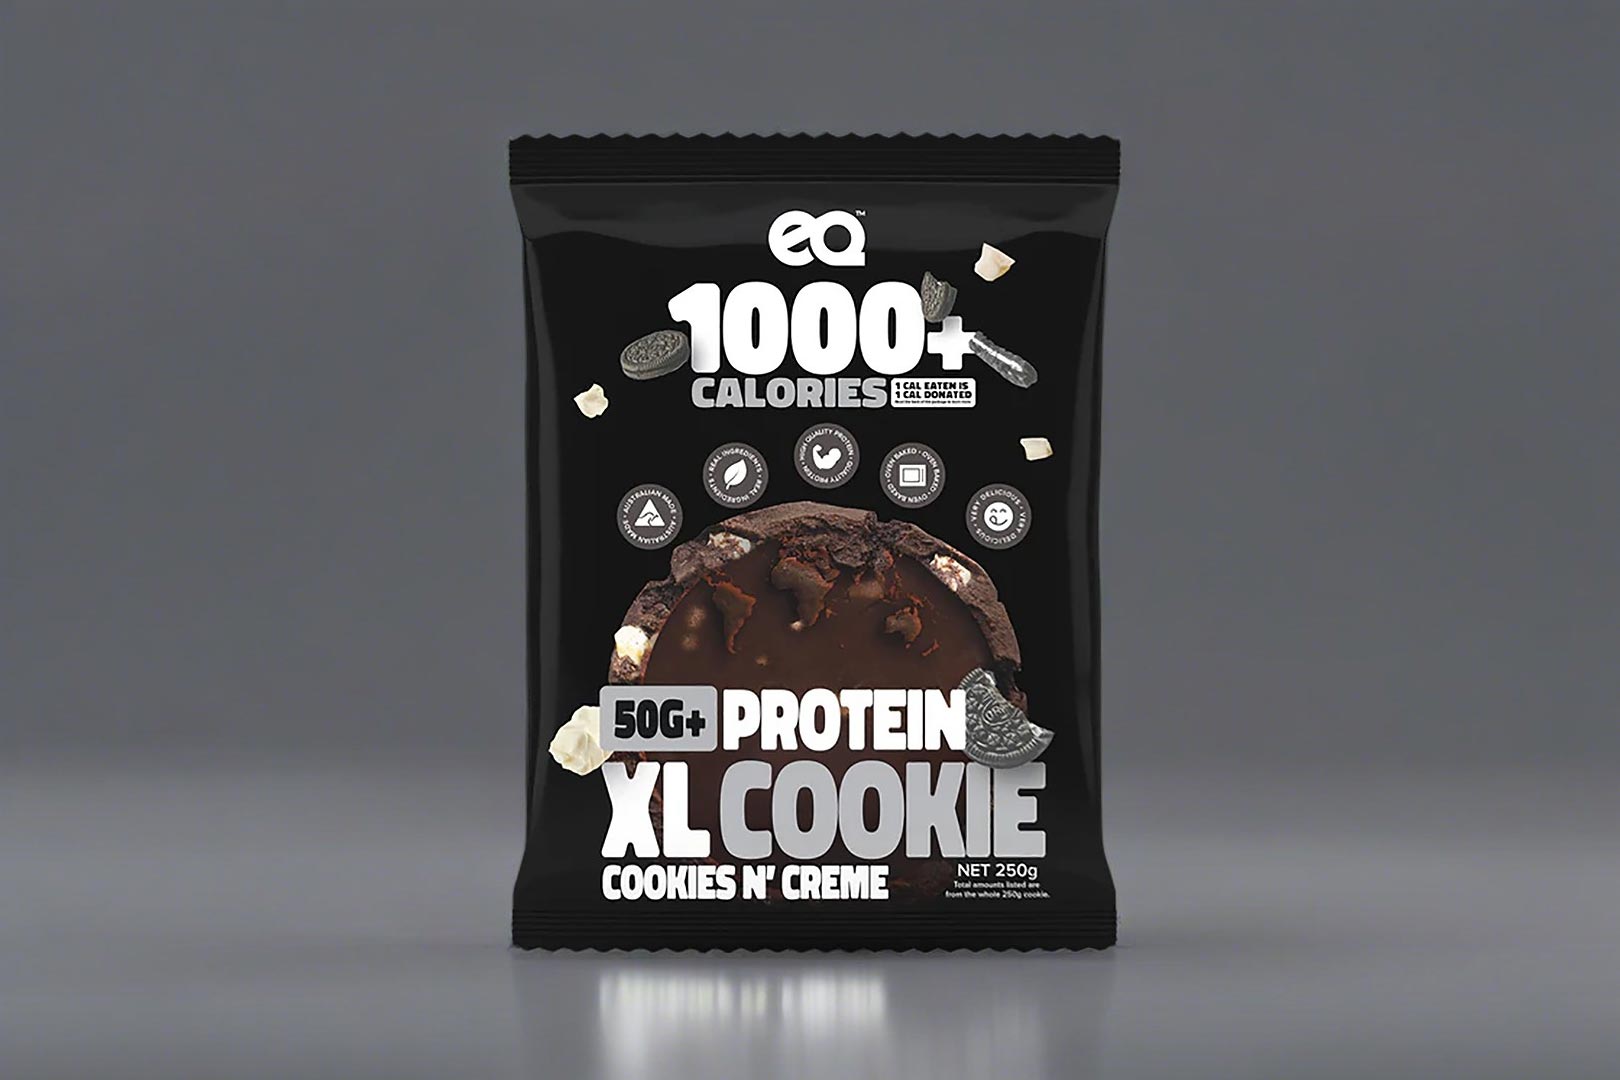 Introducing Eq Food Protein Cookies